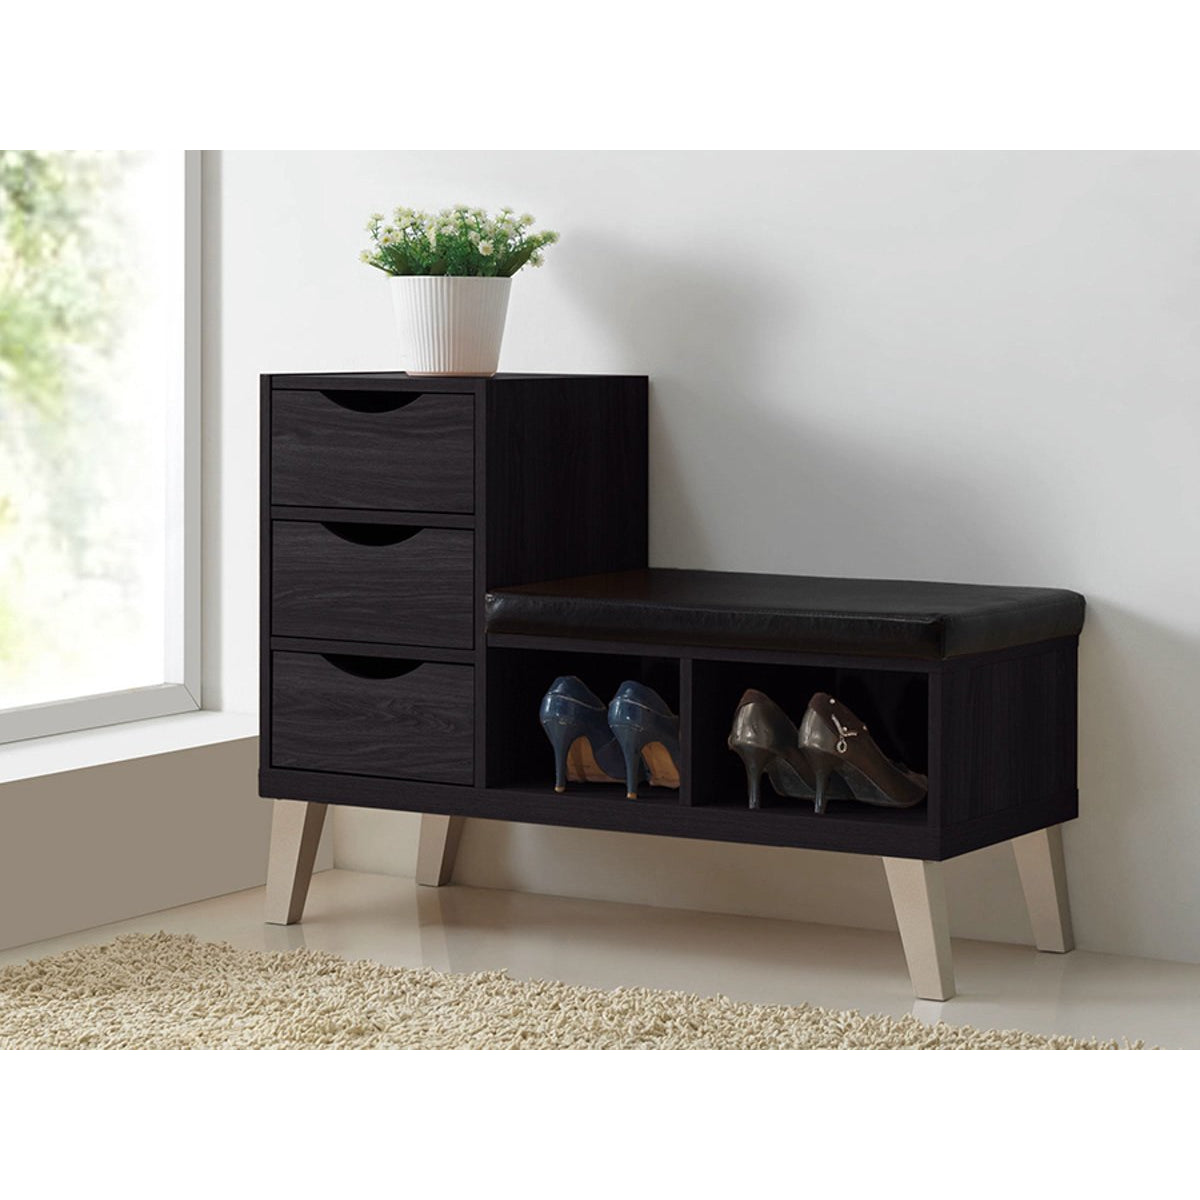 Baxton Studio Arielle Modern and Contemporary Dark Brown Wood 3-drawer Shoe Storage Padded Leatherette Seating Bench with Two Open Shelves Baxton Studio-benches-Minimal And Modern - 4